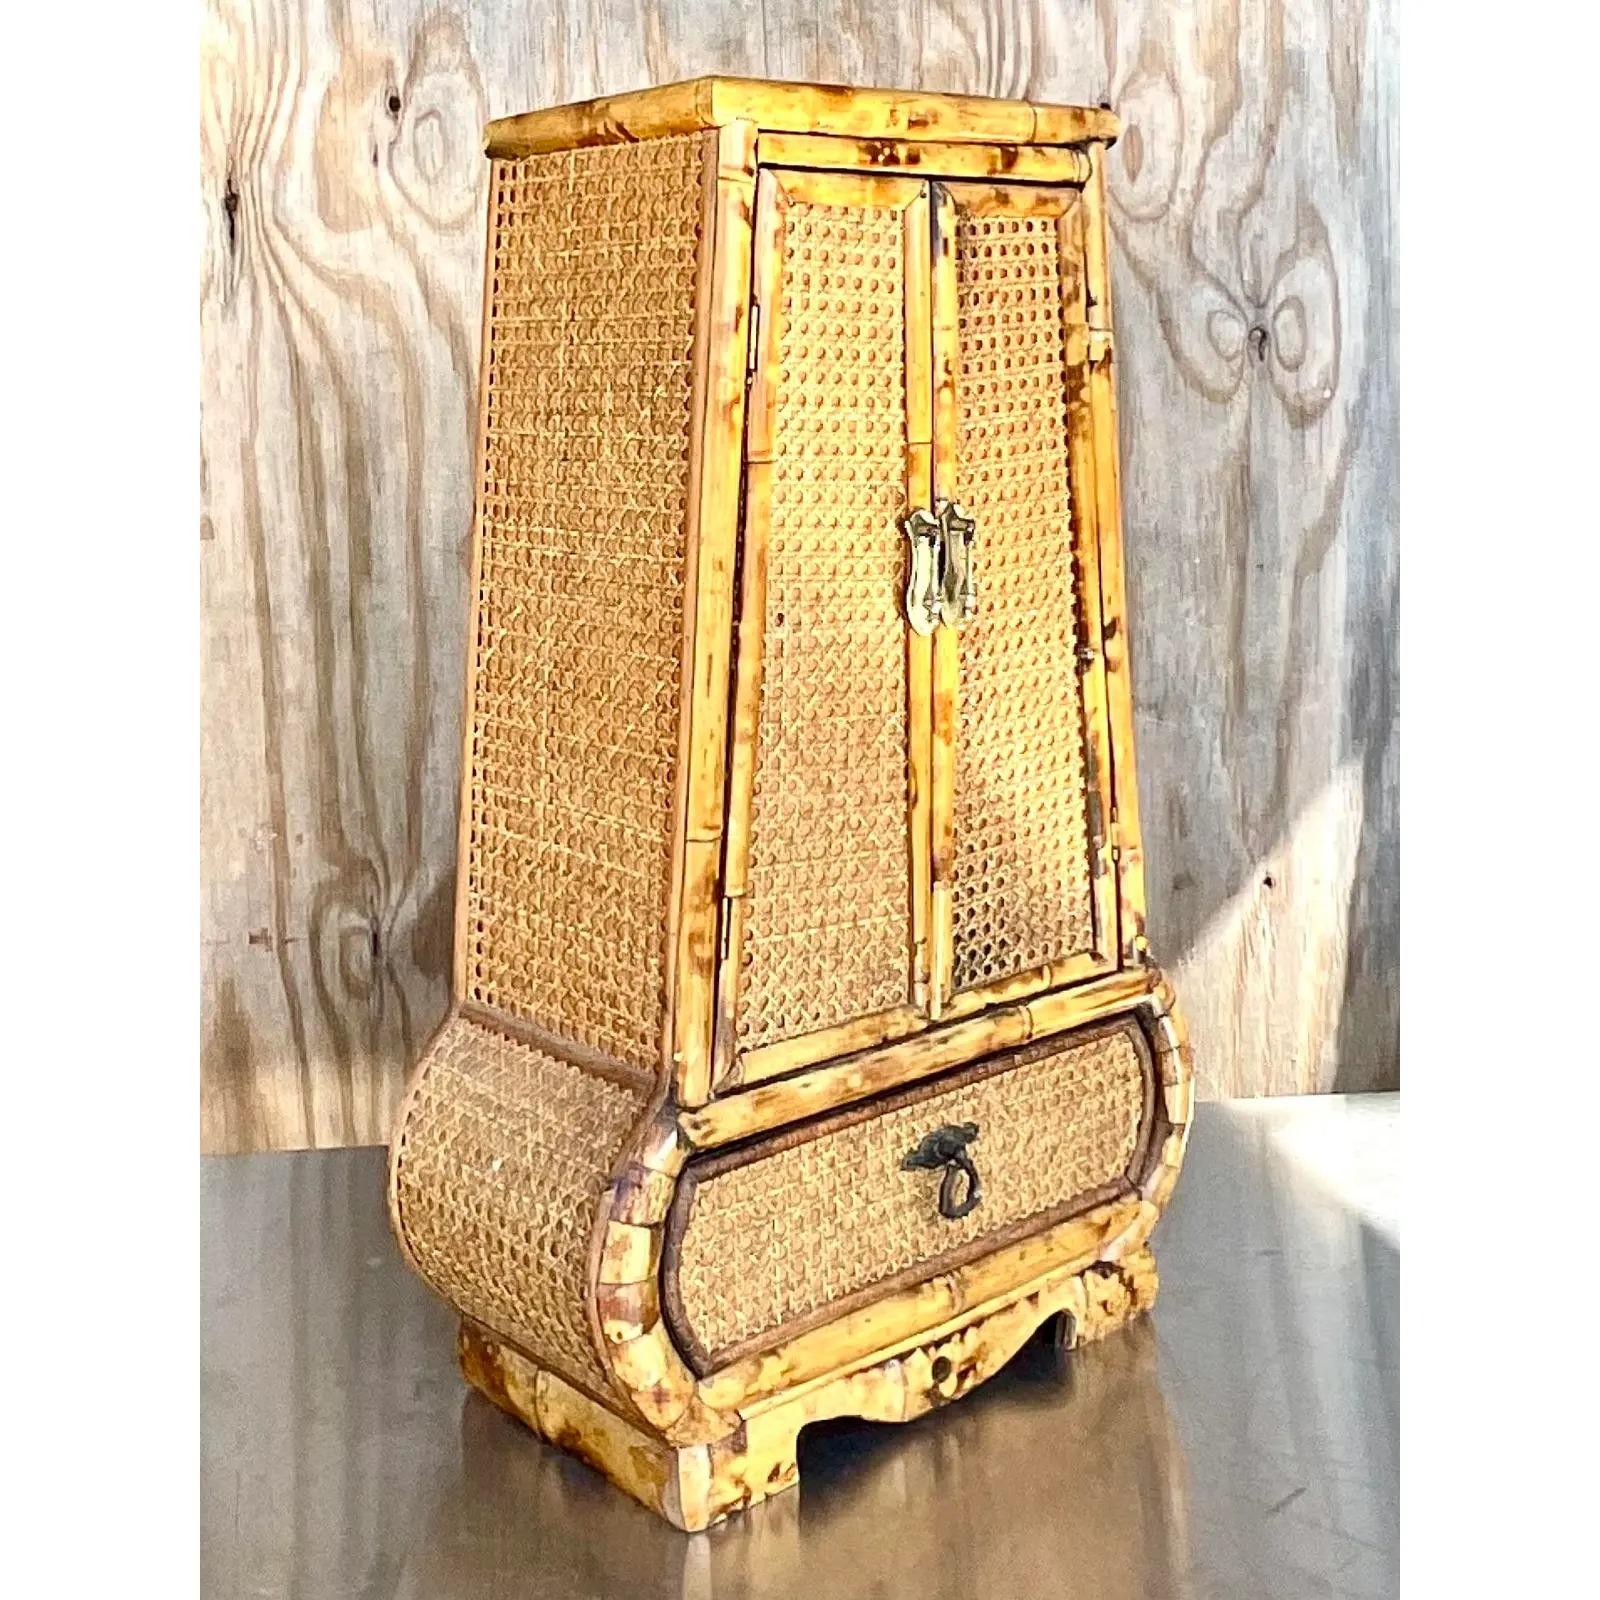 A charming little vintage Coastal cabinet. A chic keyhole shape in bamboo and cane. Perfect on your tabletop, desk or dry bar. Just enough storage for your essentials! Acquired from a Palm a each estate.